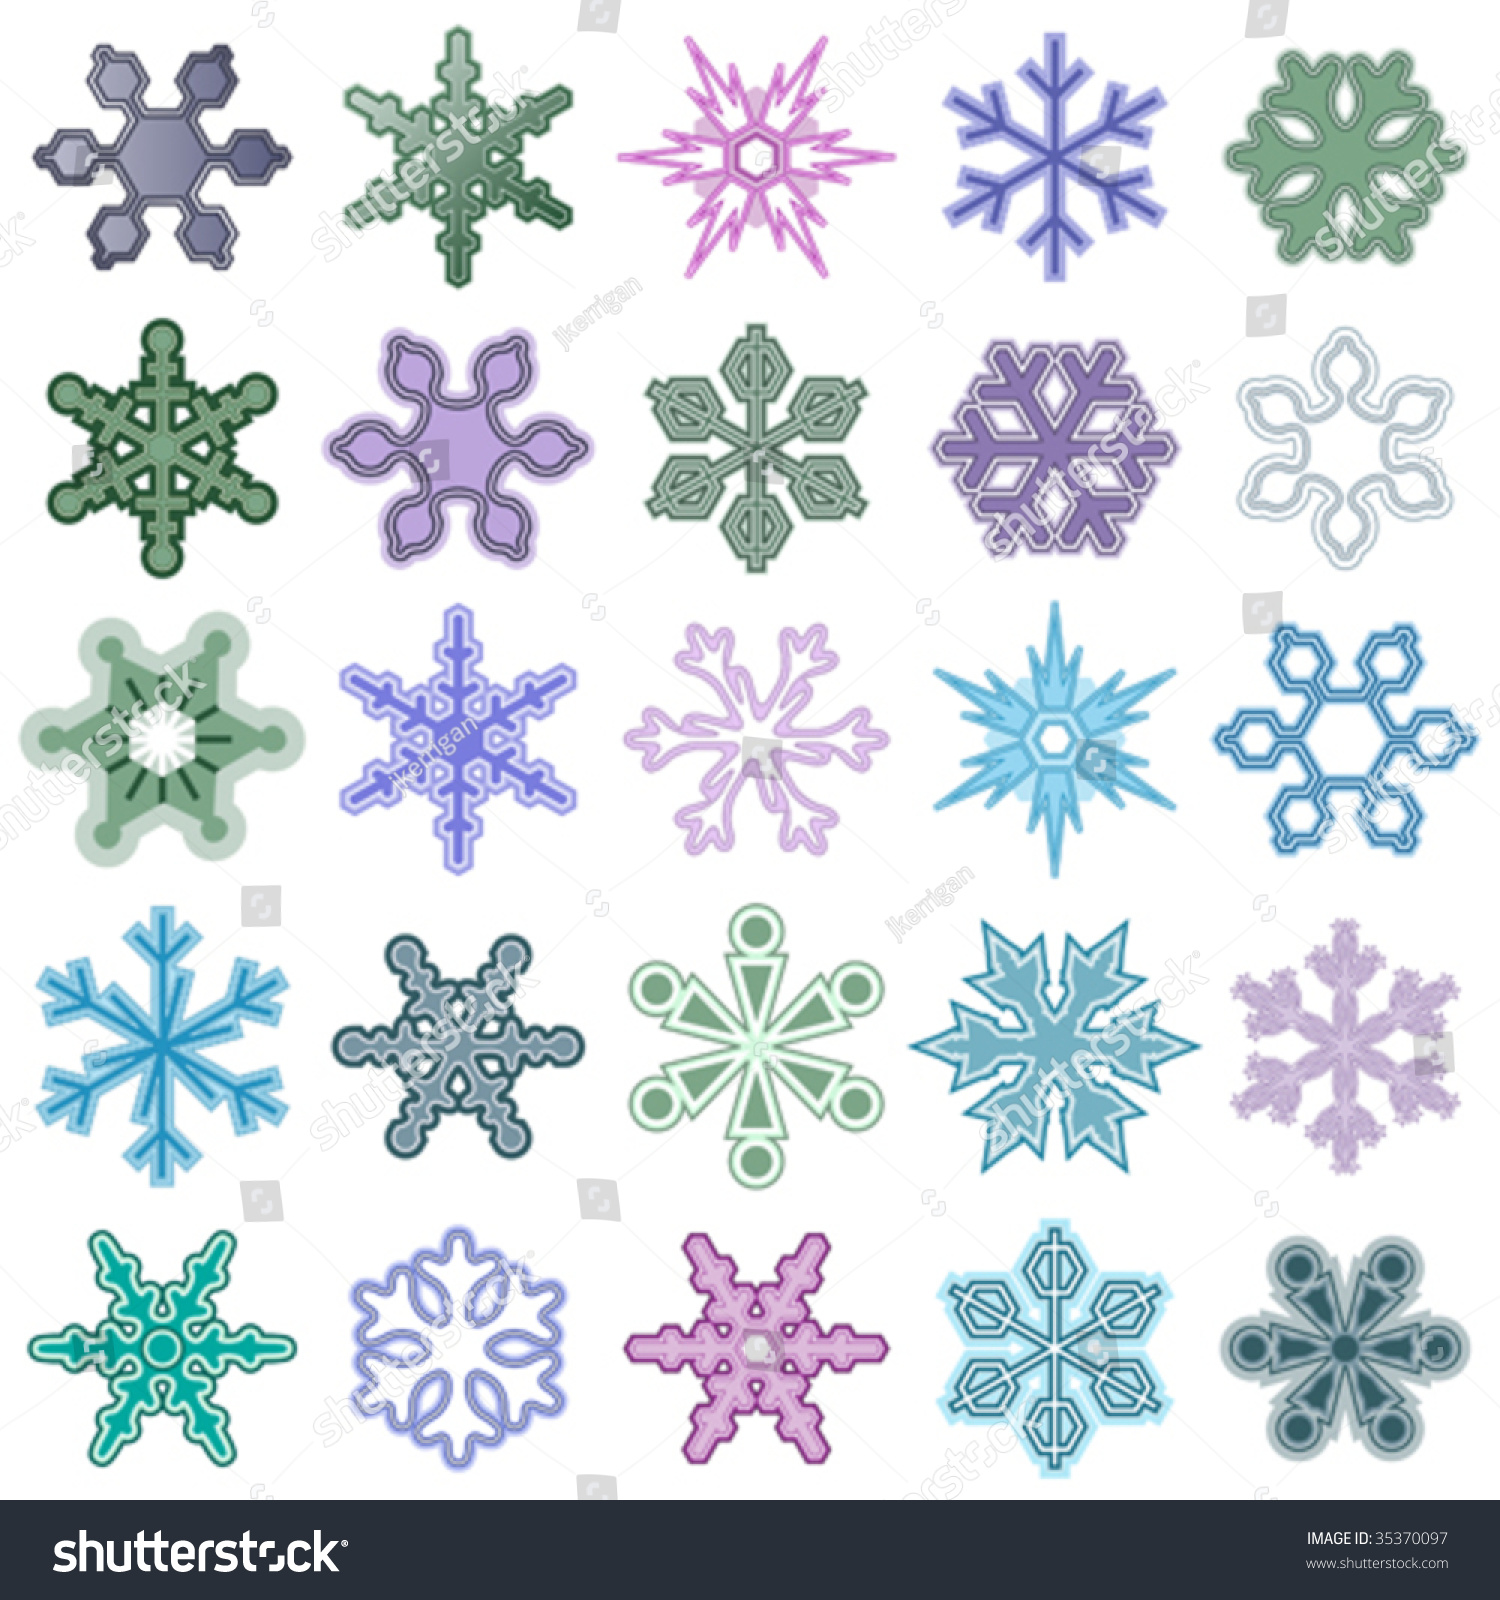 Vector Illustration Set Of Snowflakes In Soft Pastel Colors. - 35370097 ...